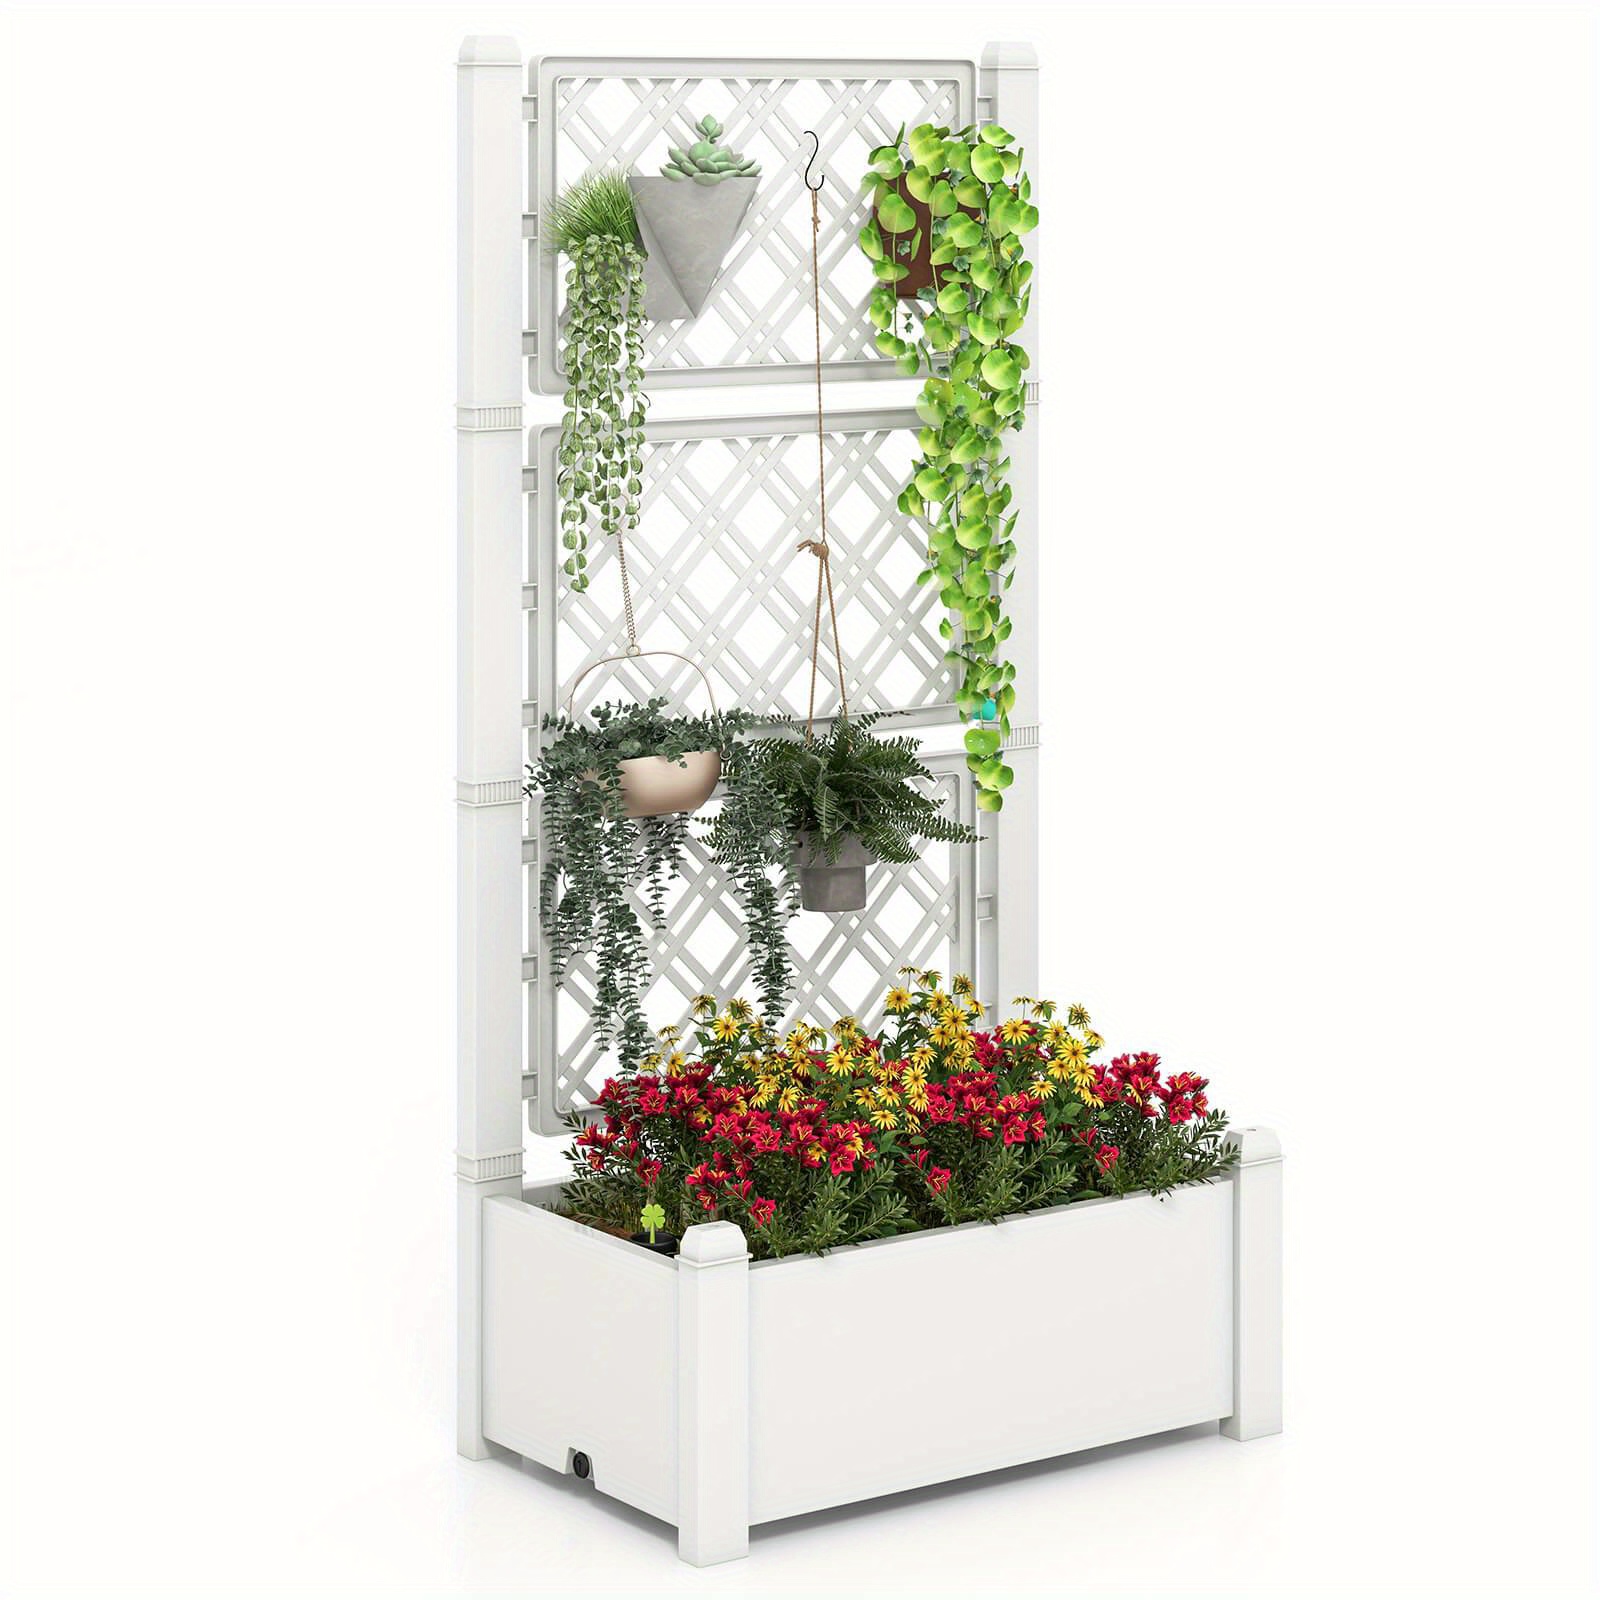 

Multigot Outdoor Planter Box With Trellis Water Level Indicator Removable Space Dividers